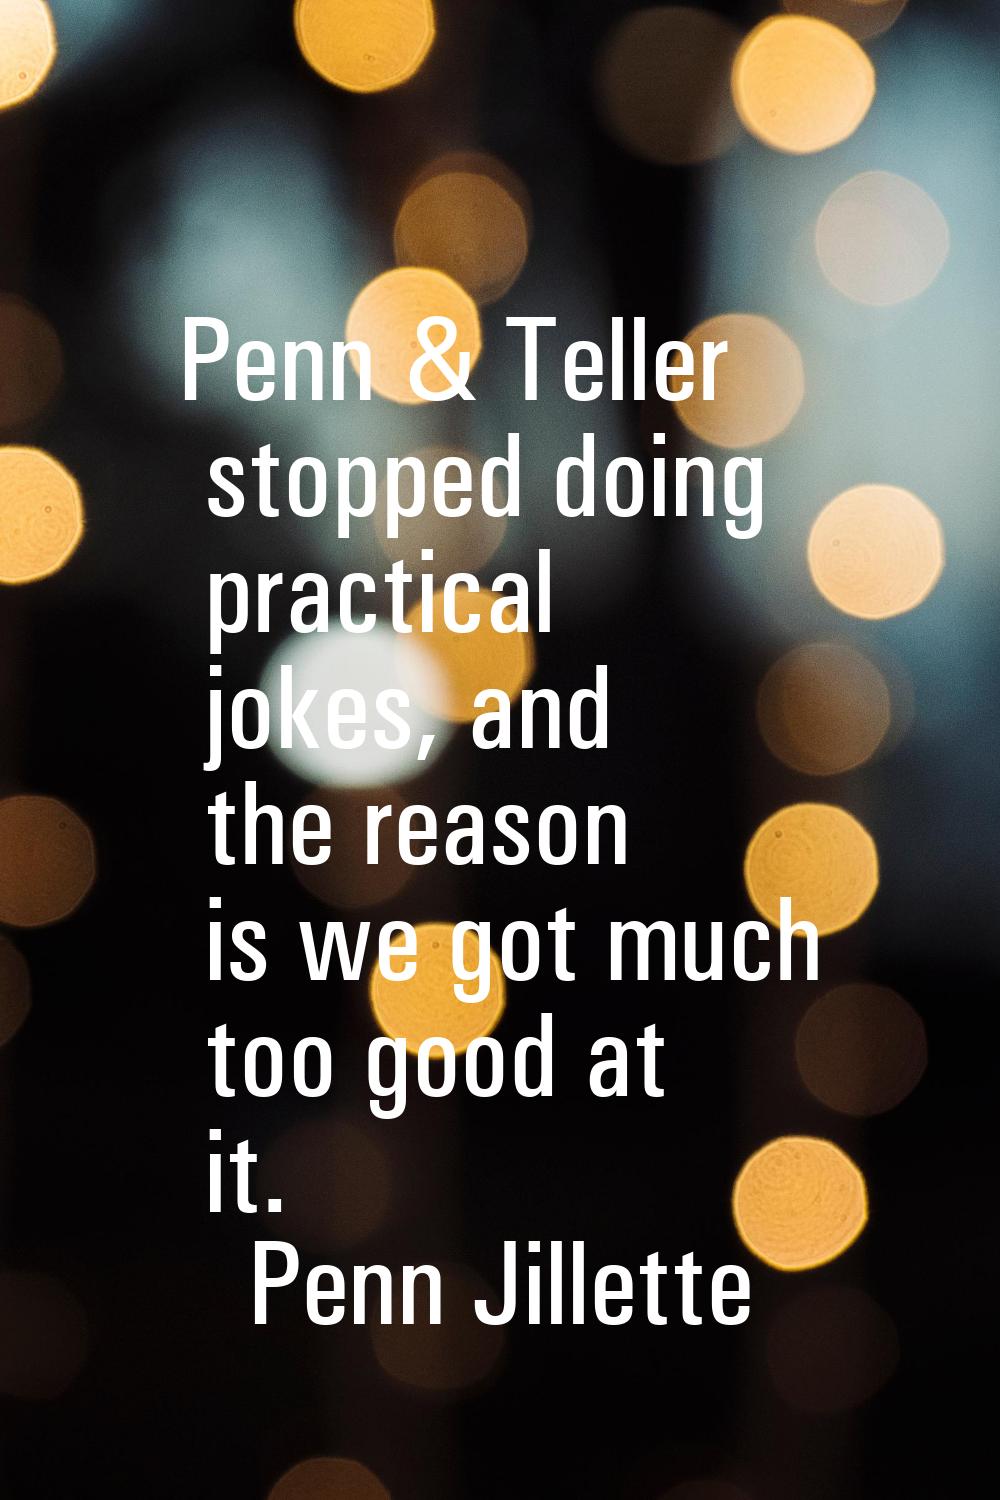 Penn & Teller stopped doing practical jokes, and the reason is we got much too good at it.